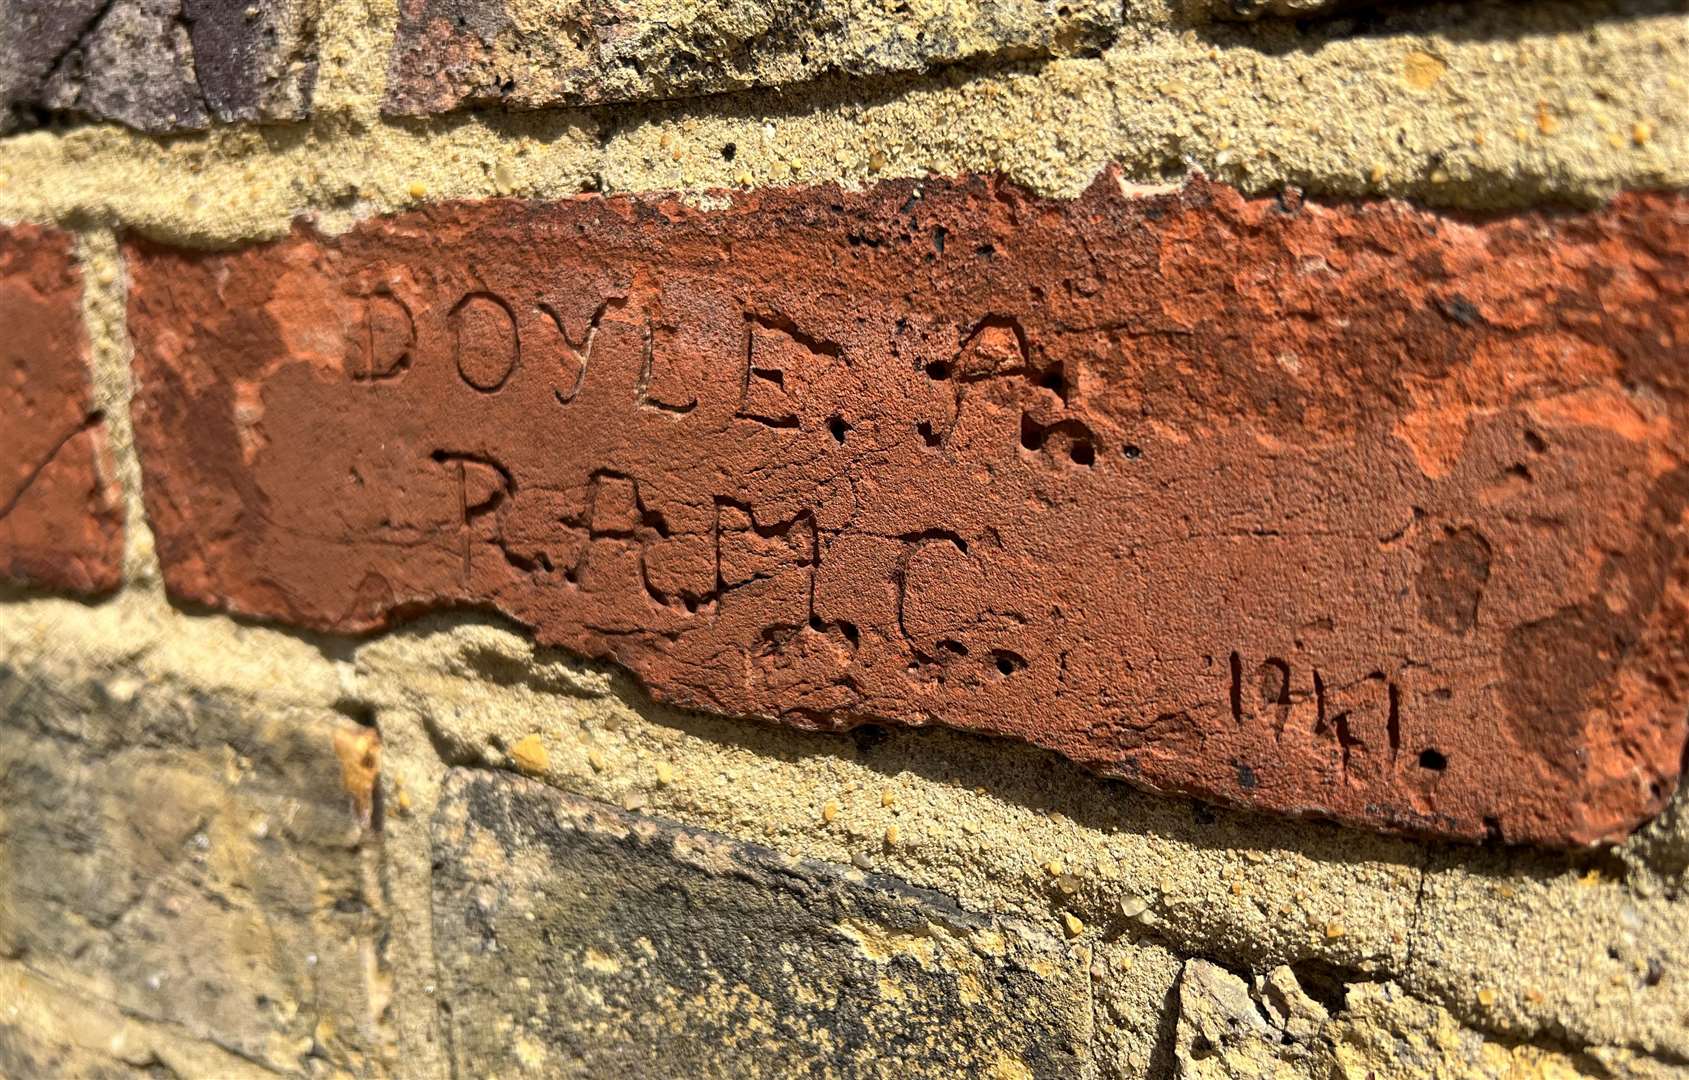 Engravings made by servicemen treated at the hospital can still be seen on the wall